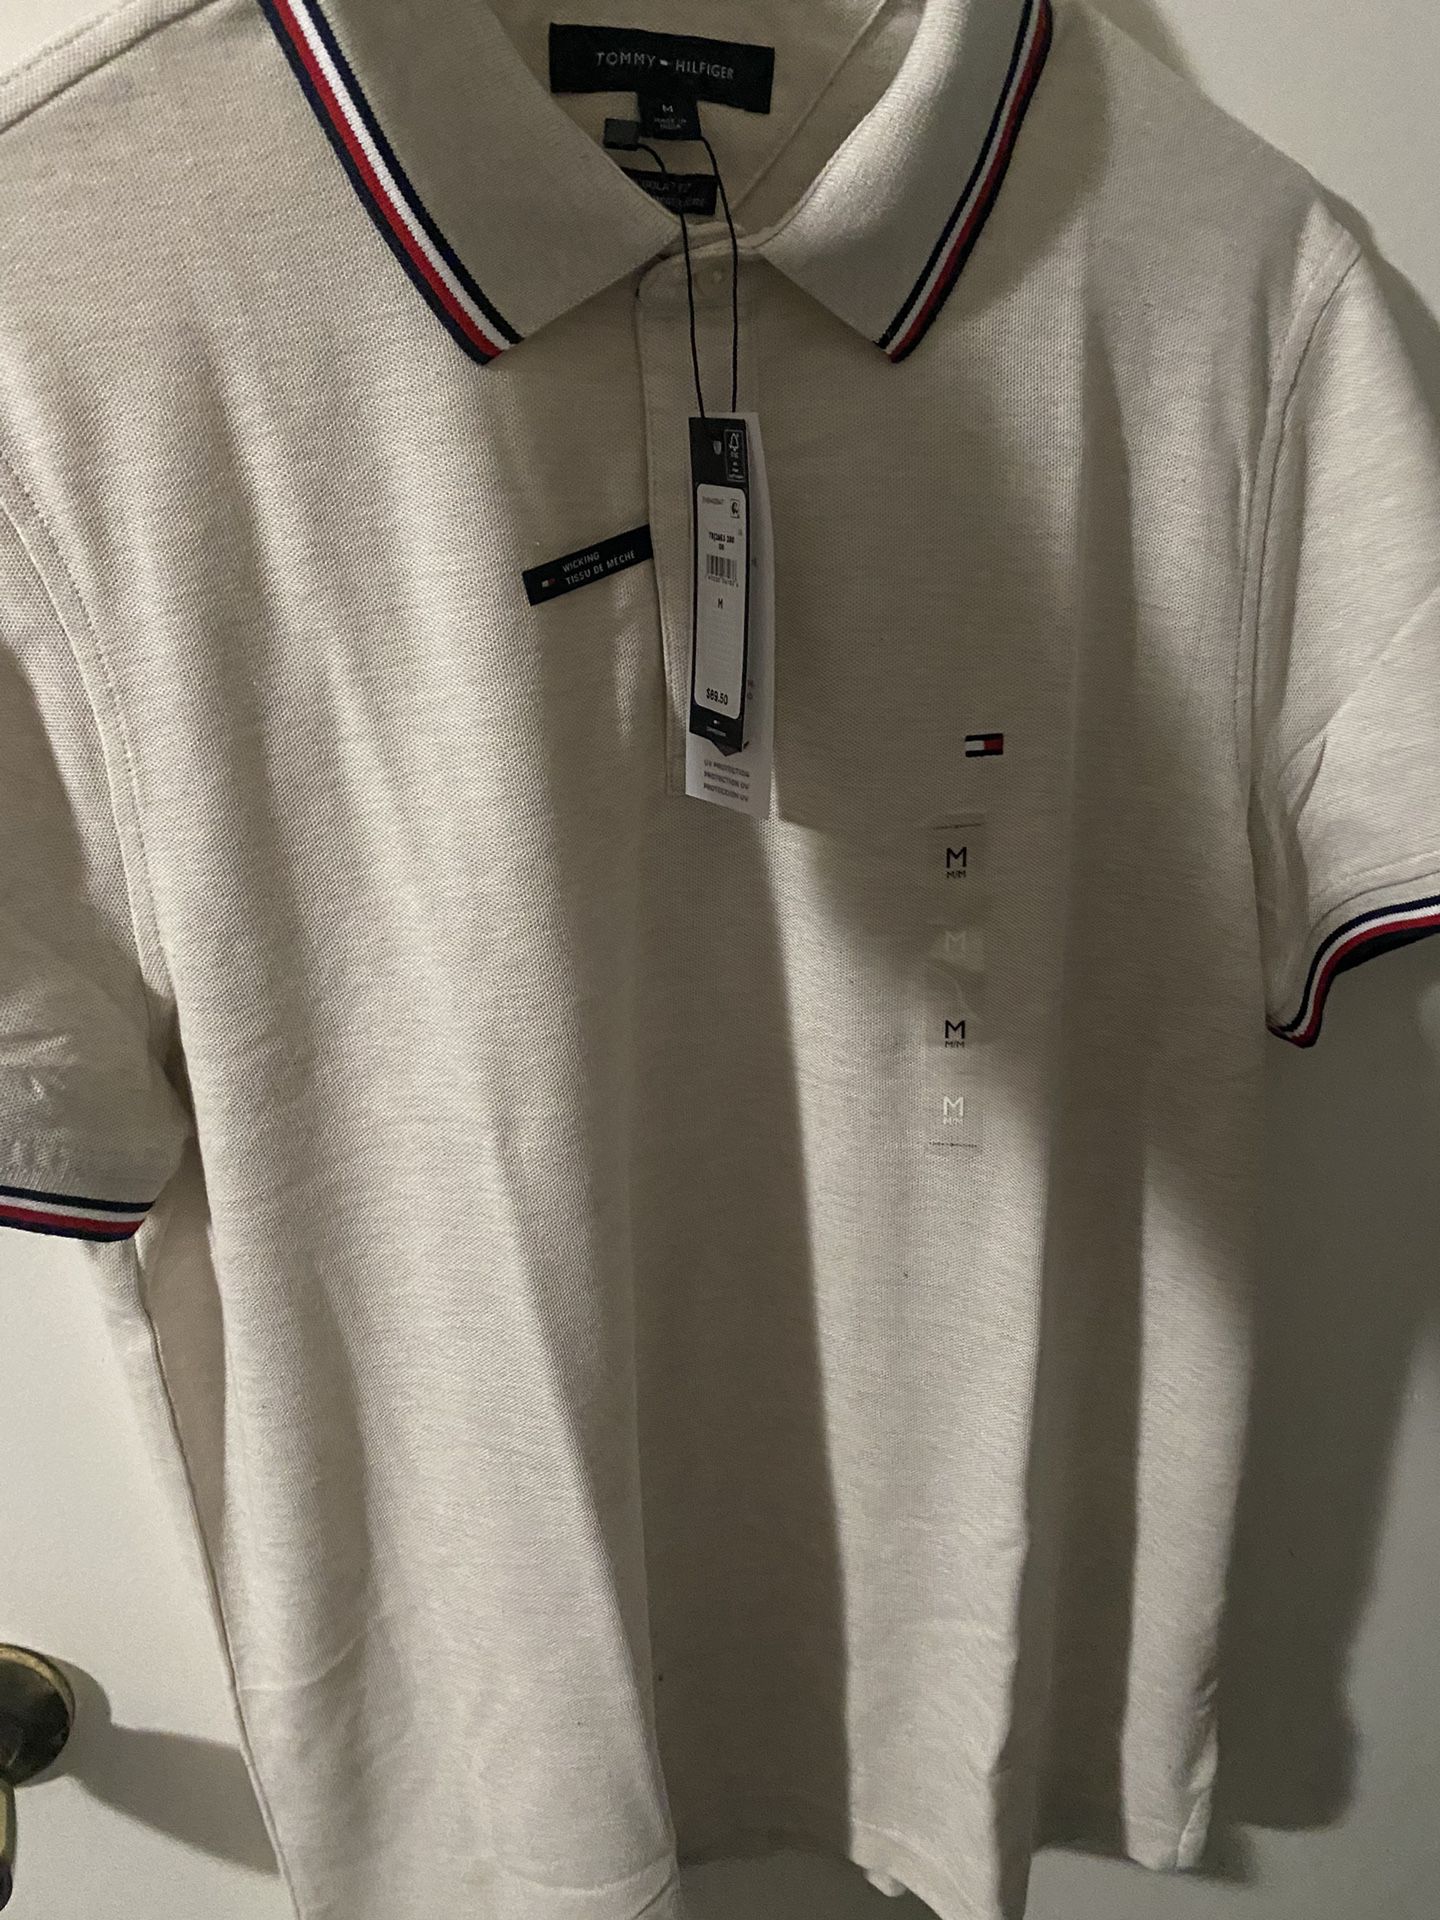 Tommy Hilfiger for Sale in Fresno, CA OfferUp